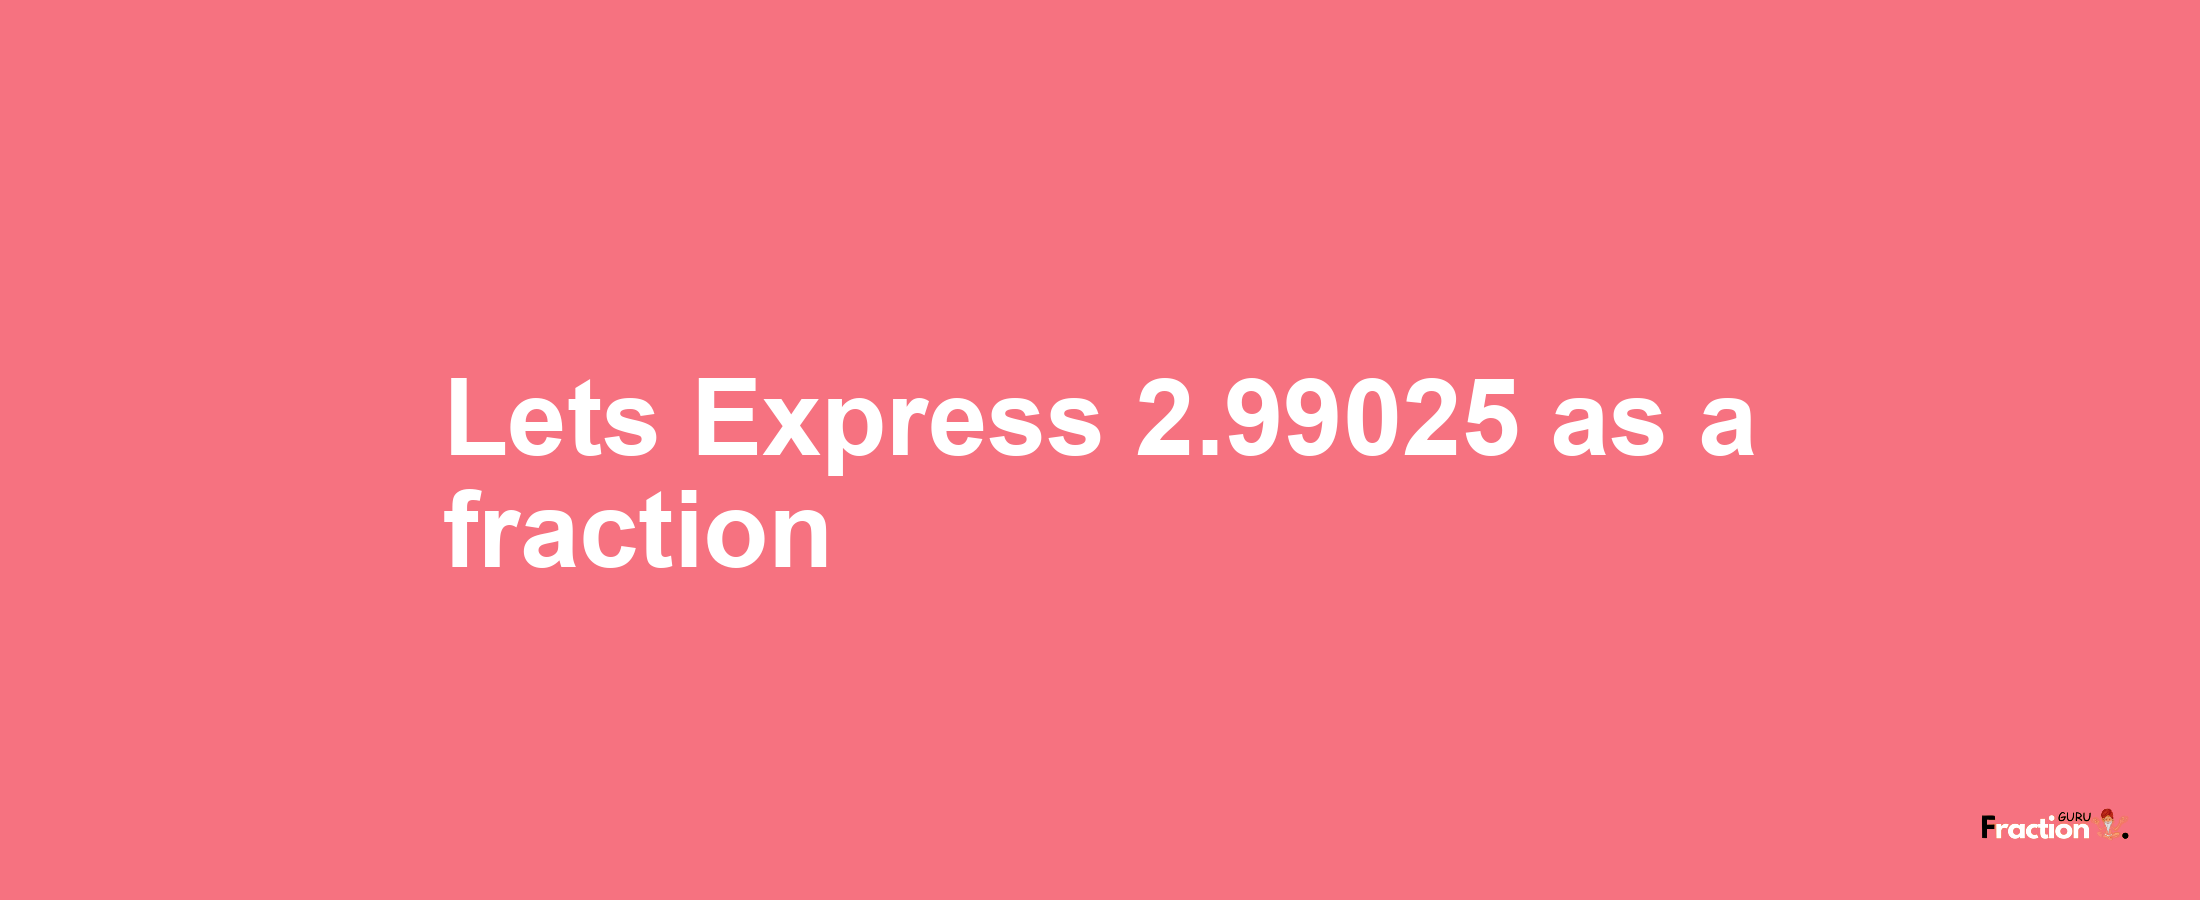 Lets Express 2.99025 as afraction